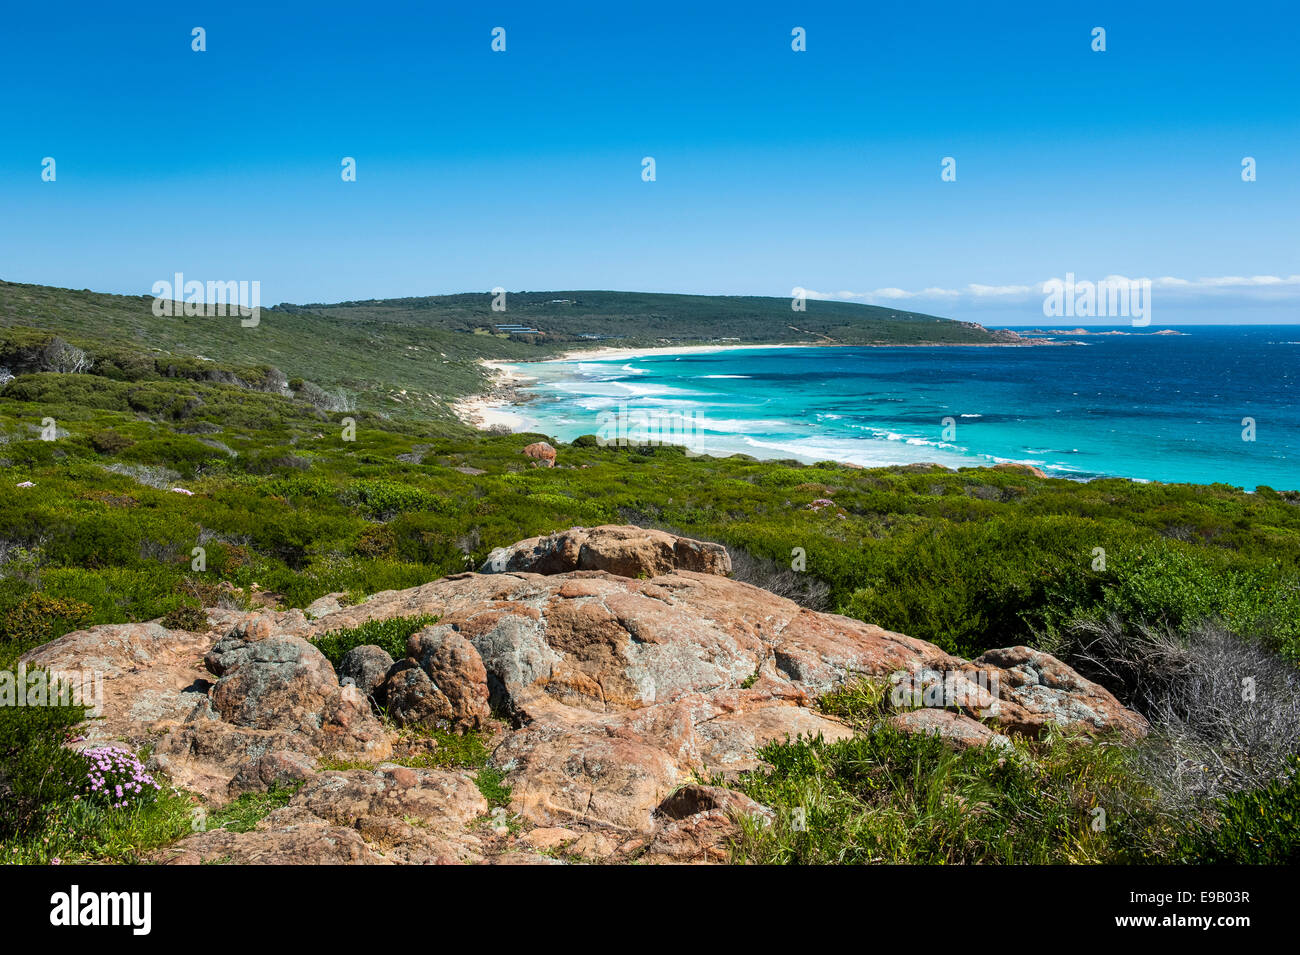 White sand beach and turquoise water, near Margaret River, Western Australia Stock Photo